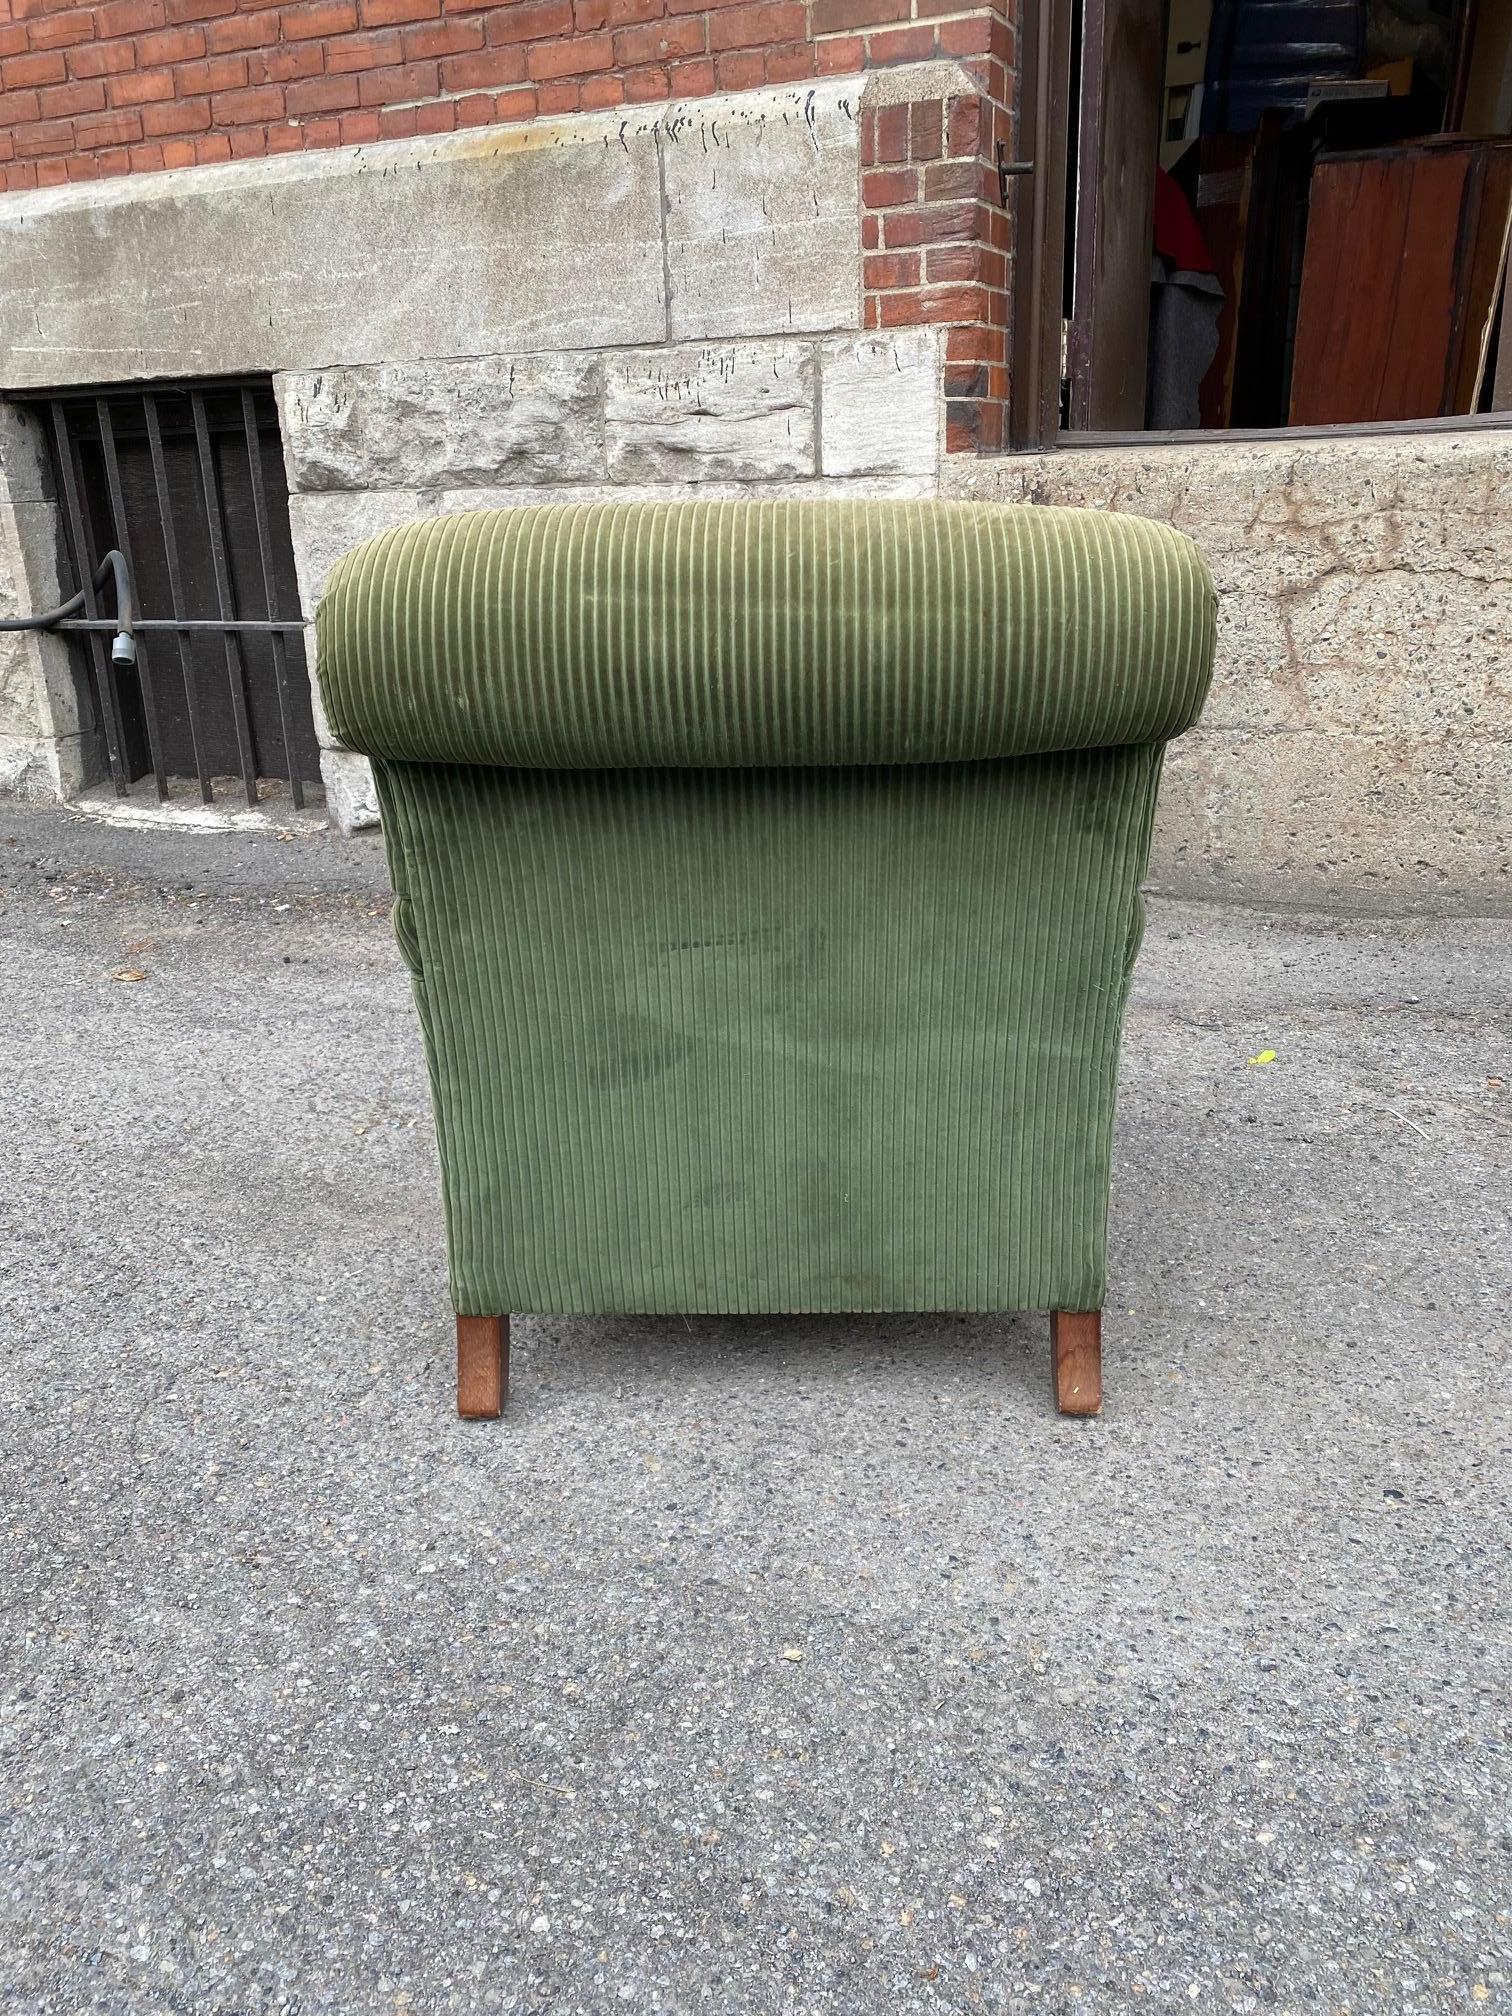 Early 20th Century Edwardian Period Velvet Upholstered Library Armchair Attributes to Howard & Sons